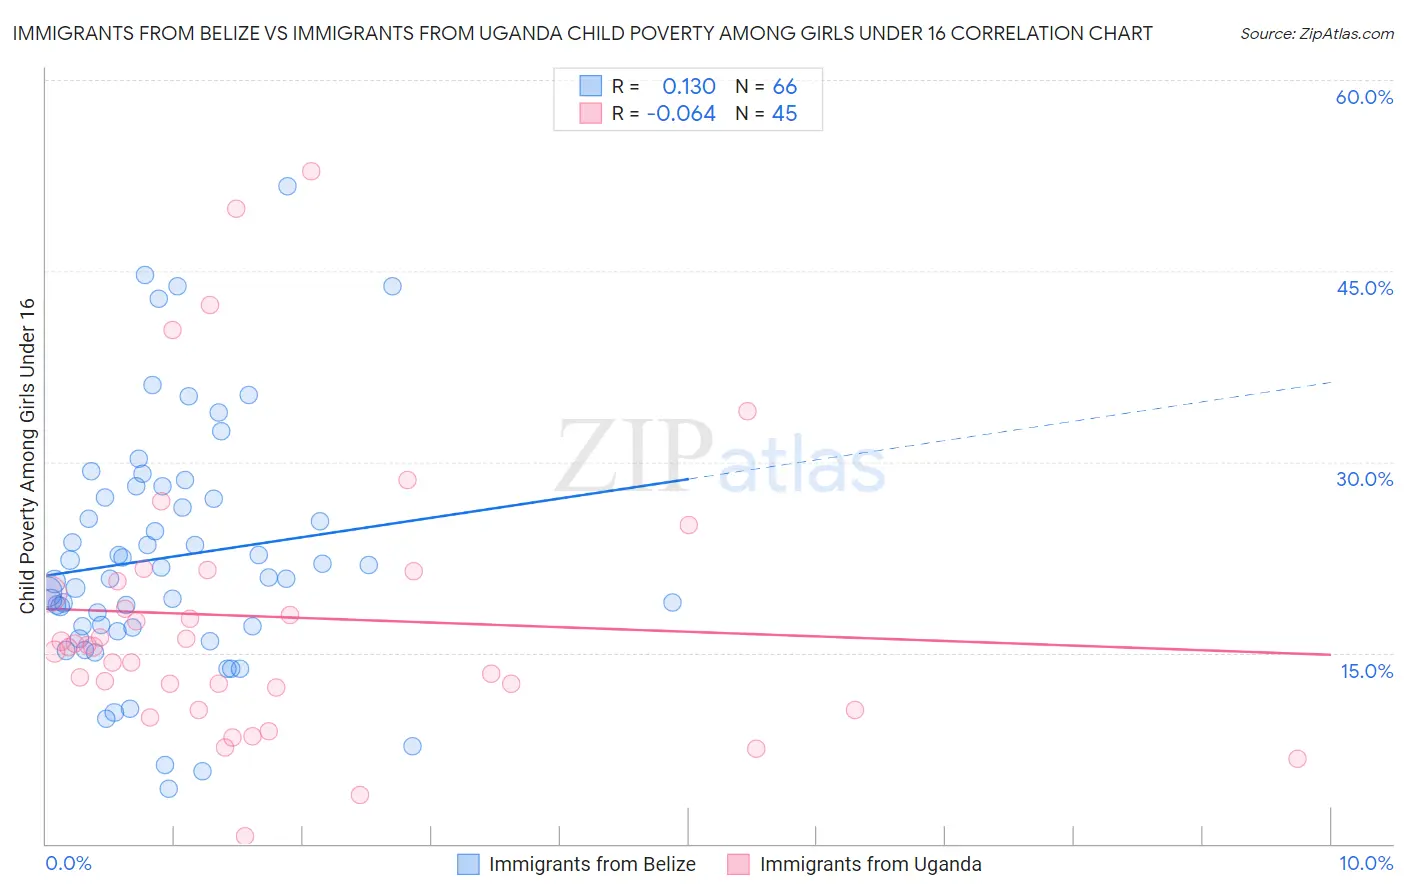 Immigrants from Belize vs Immigrants from Uganda Child Poverty Among Girls Under 16